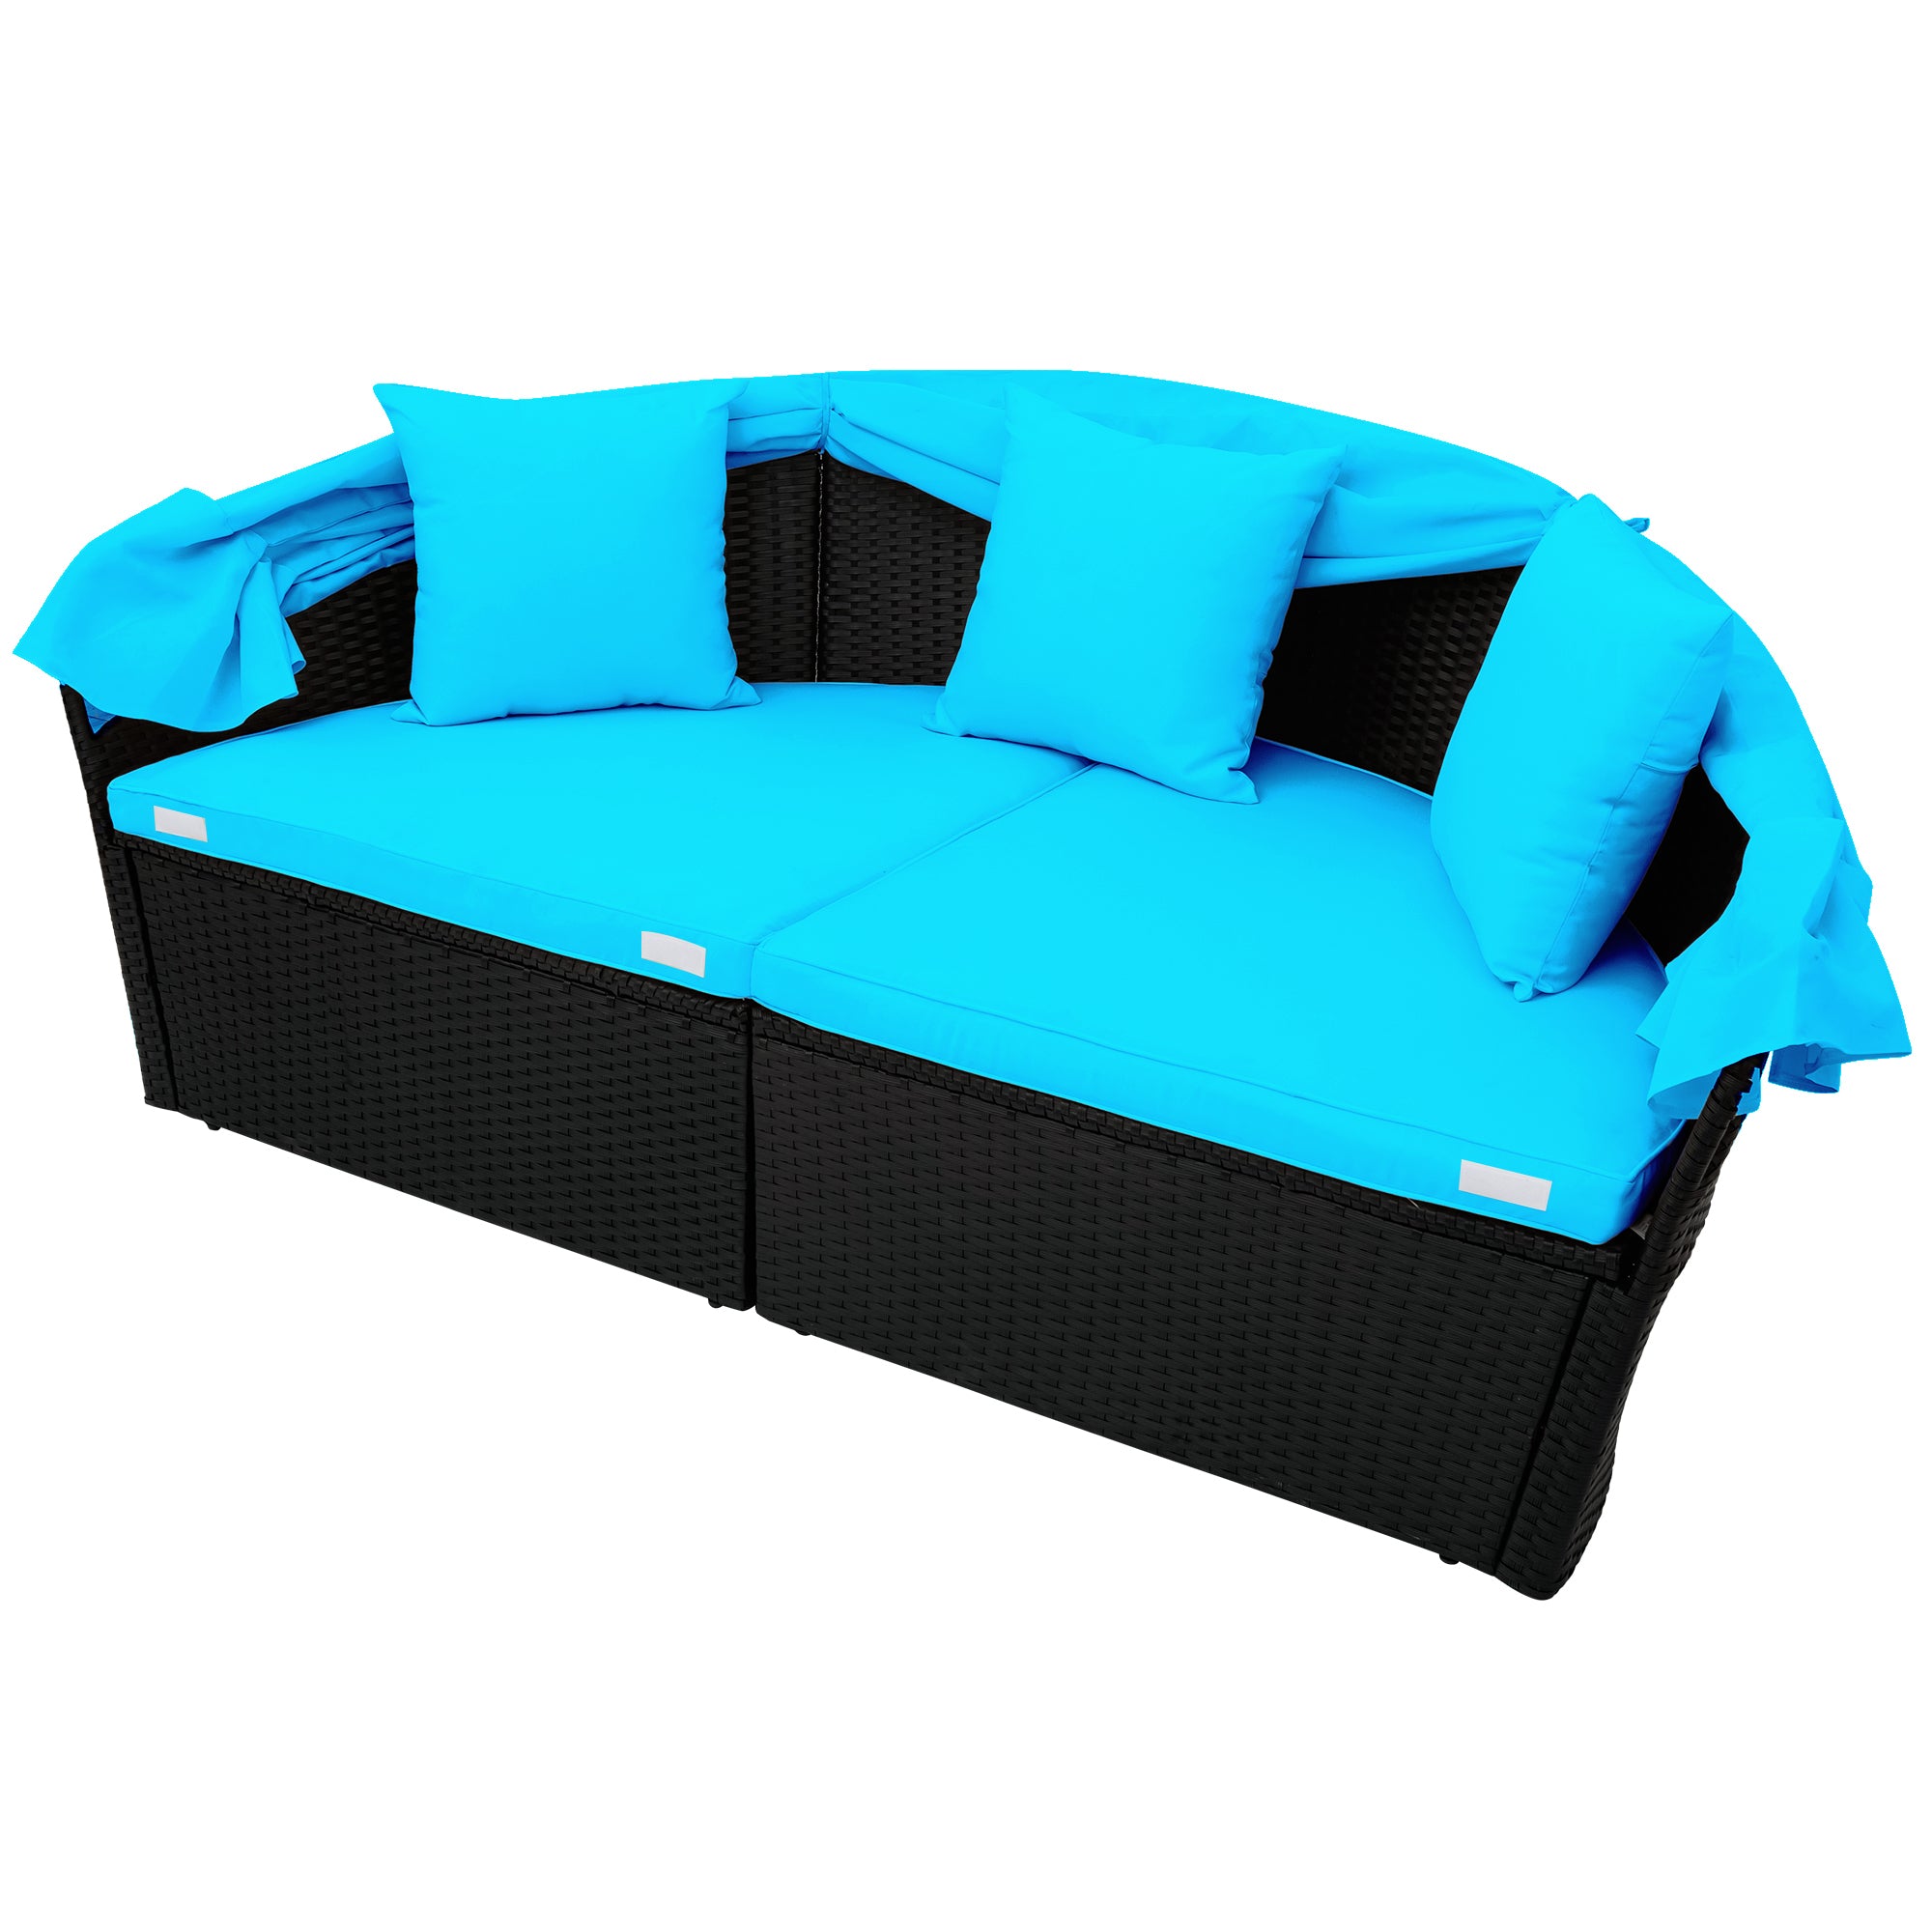 Outdoor rattan daybed sunbed with Retractable Canopy Wicker Furniture, Round Outdoor Sectional Sofa Set, Black Wicker Furniture Clamshell  Seating with Washable Cushions - Blue